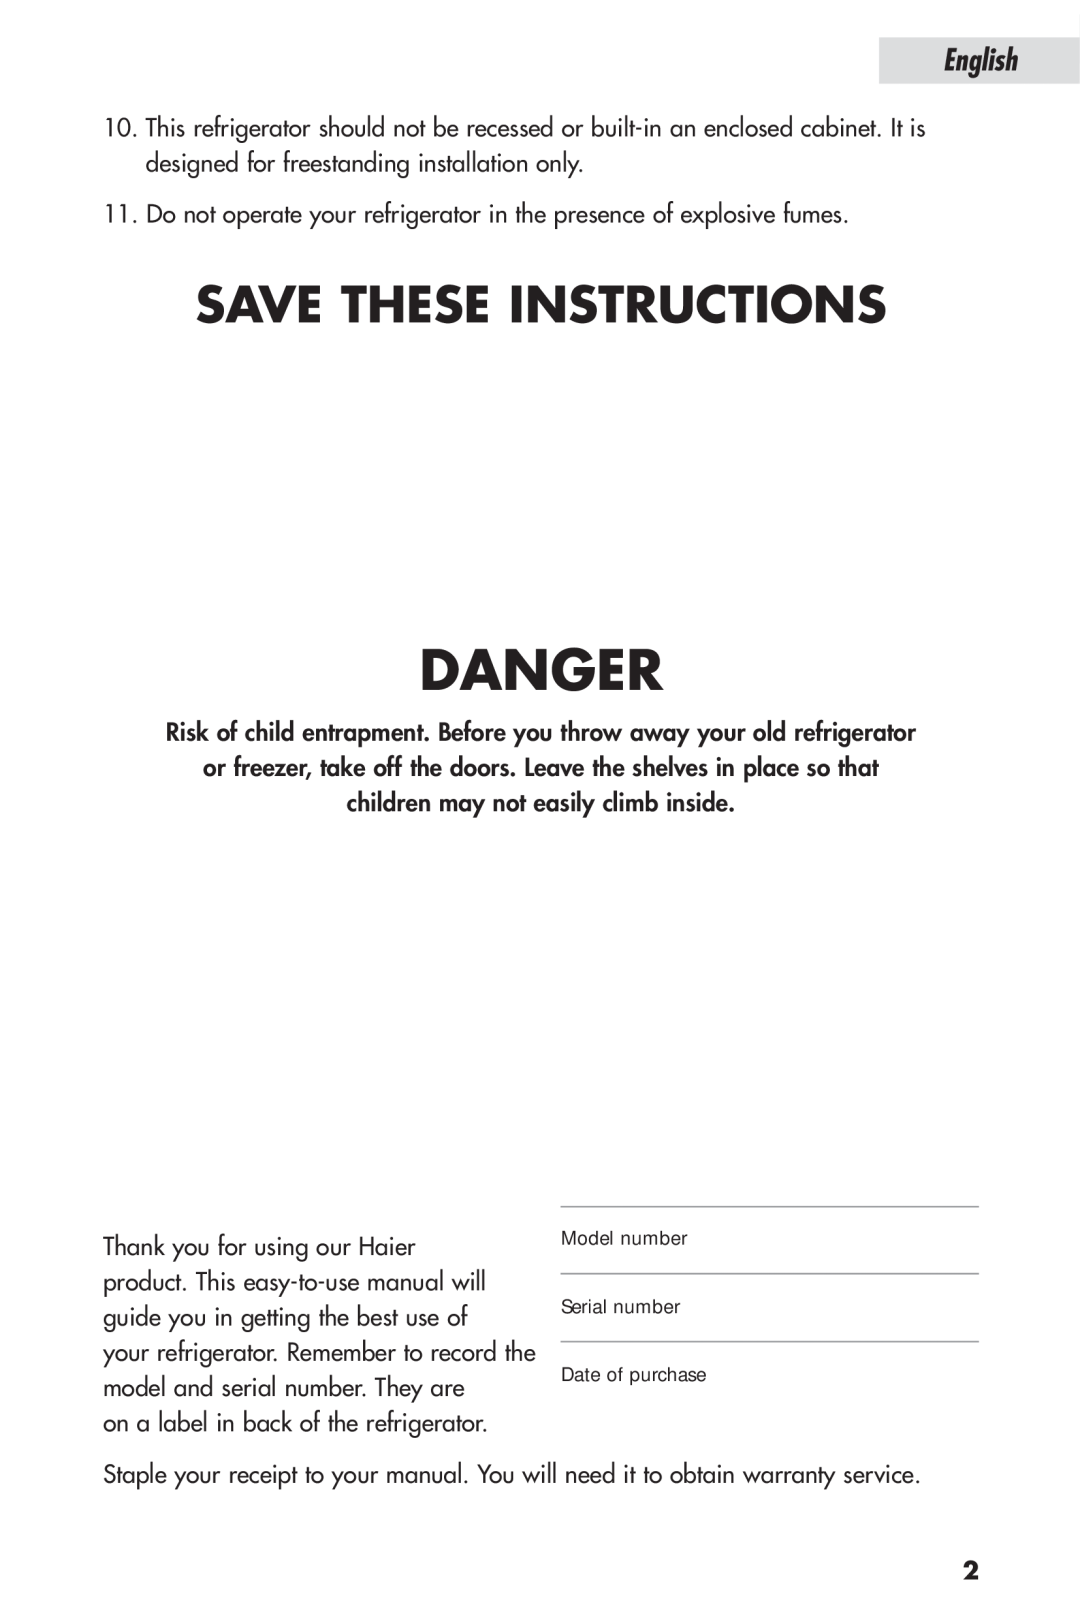 Haier HSP04WNB, HSL04WNA user manual Danger, Save These Instructions, English 